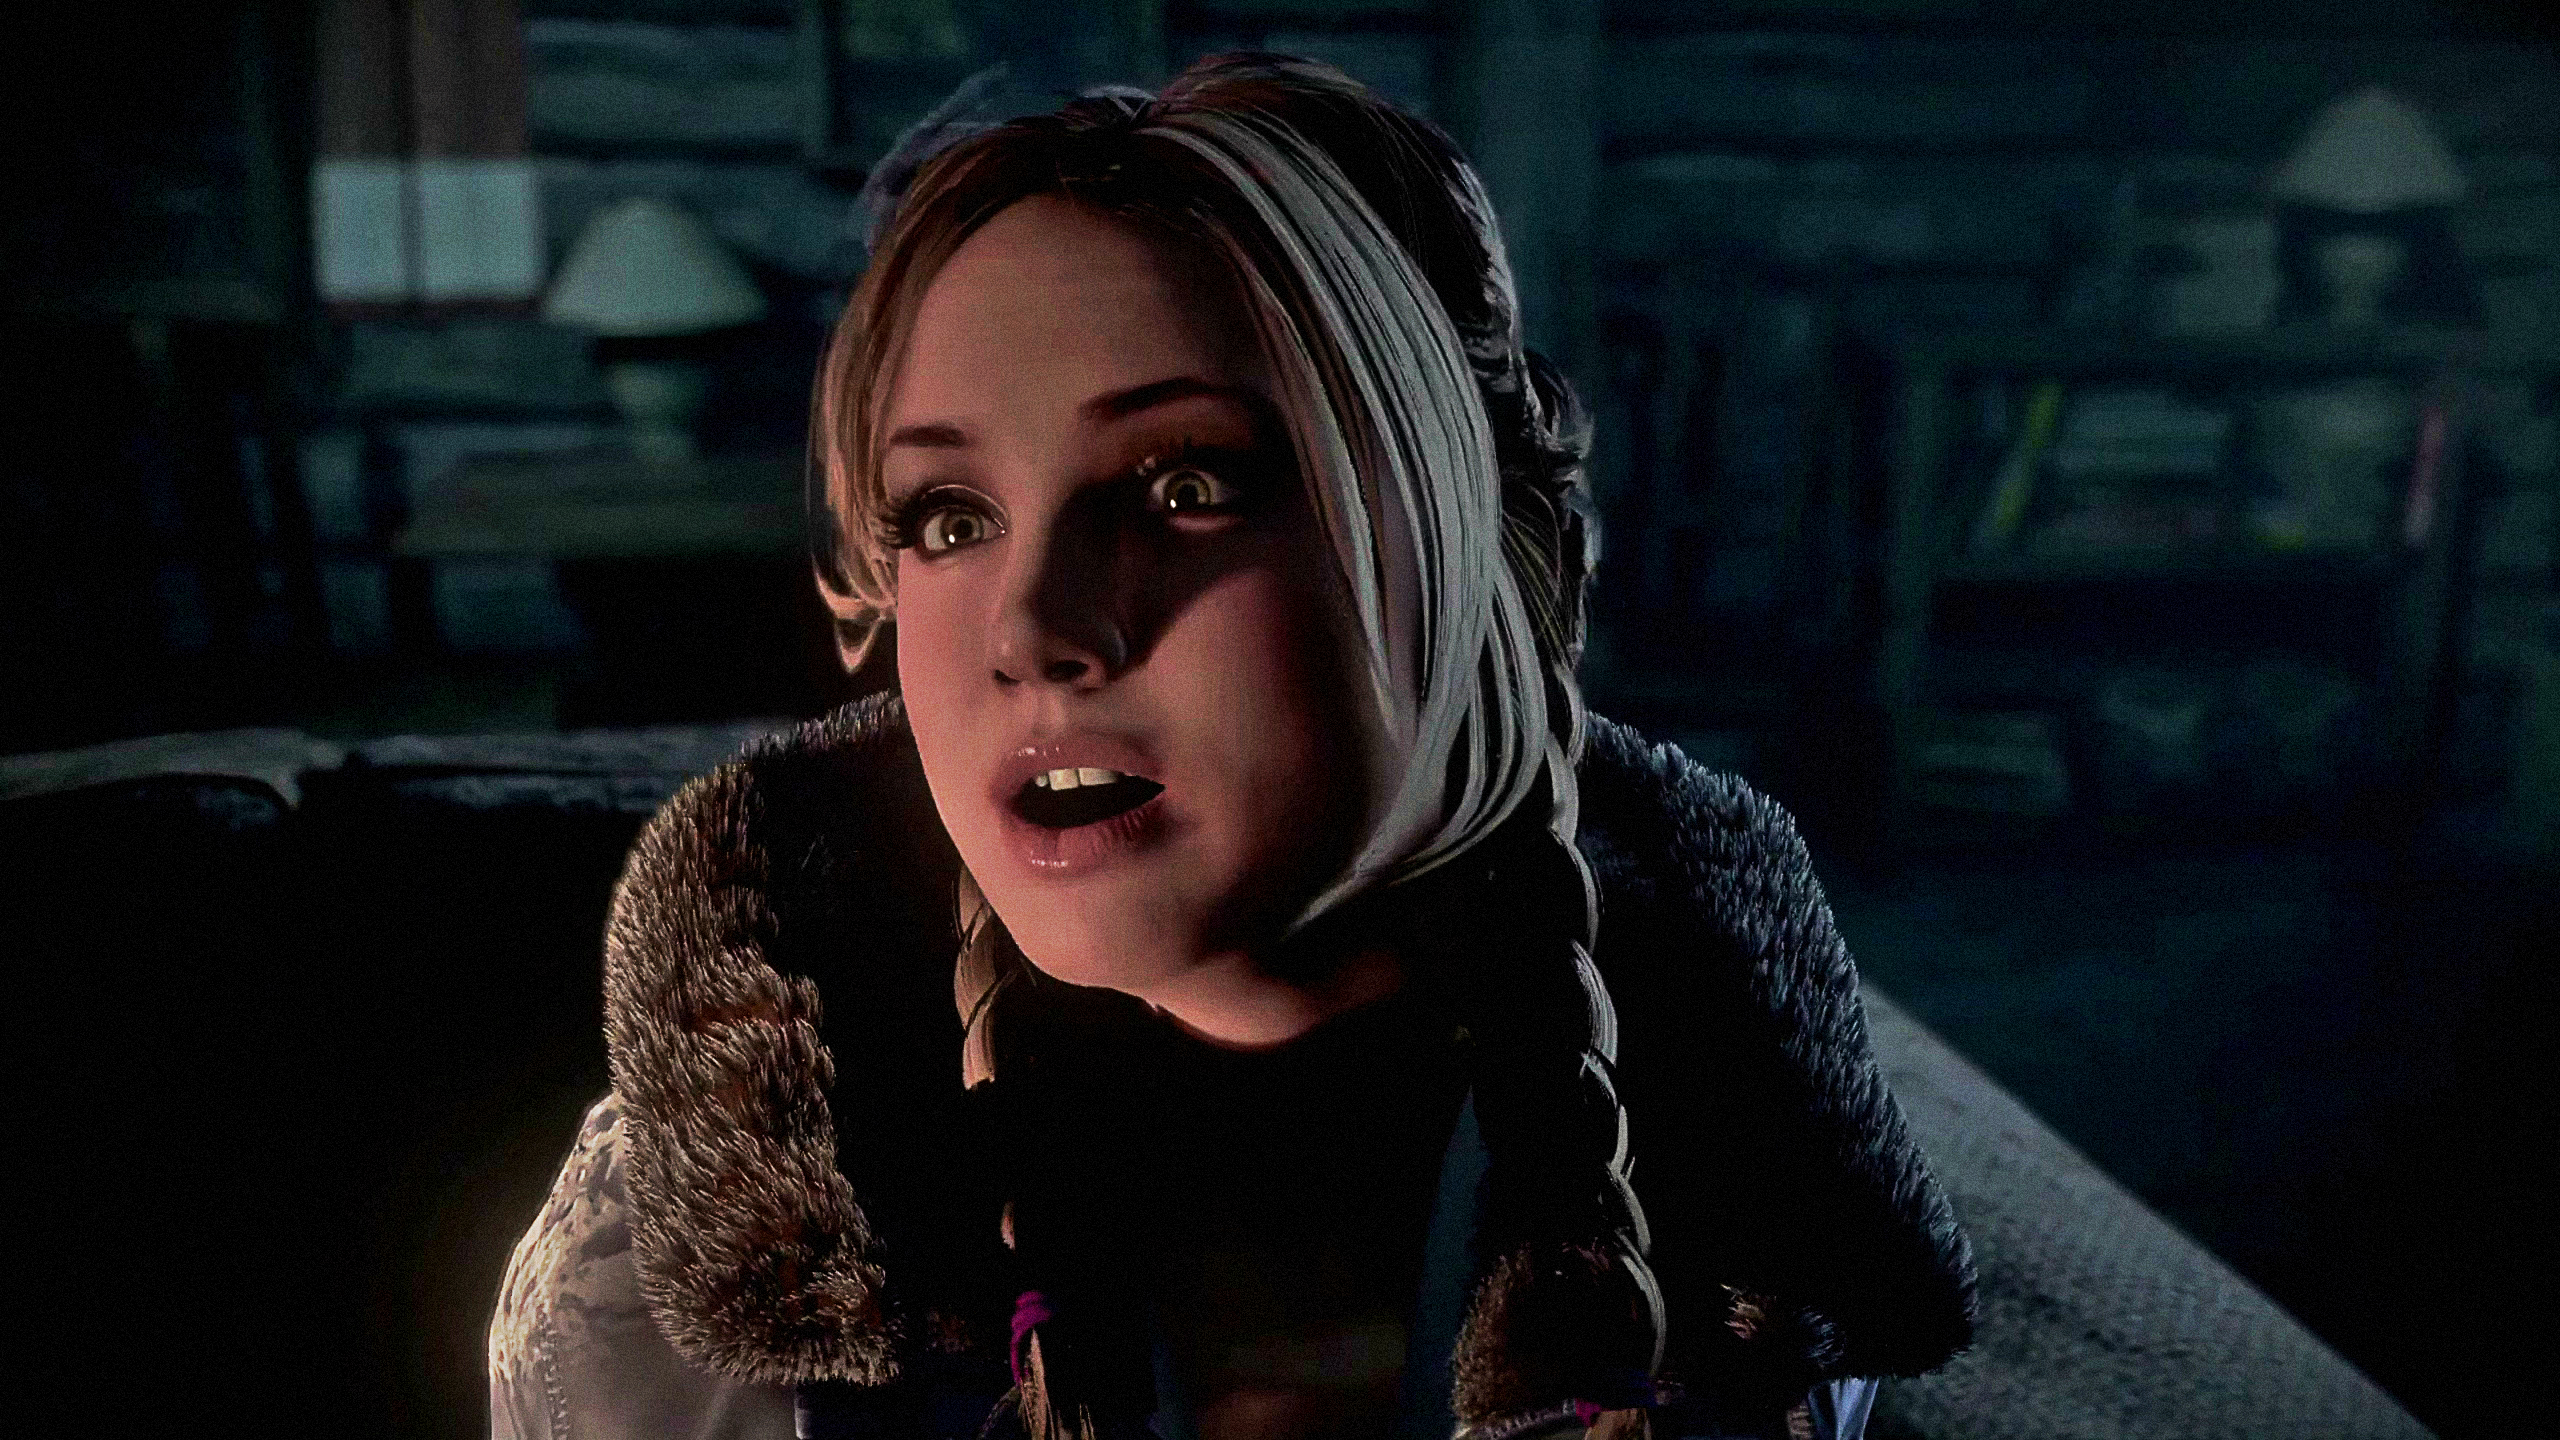 2560x1440 Until Dawn Wallpaper posted by Samantha Simps